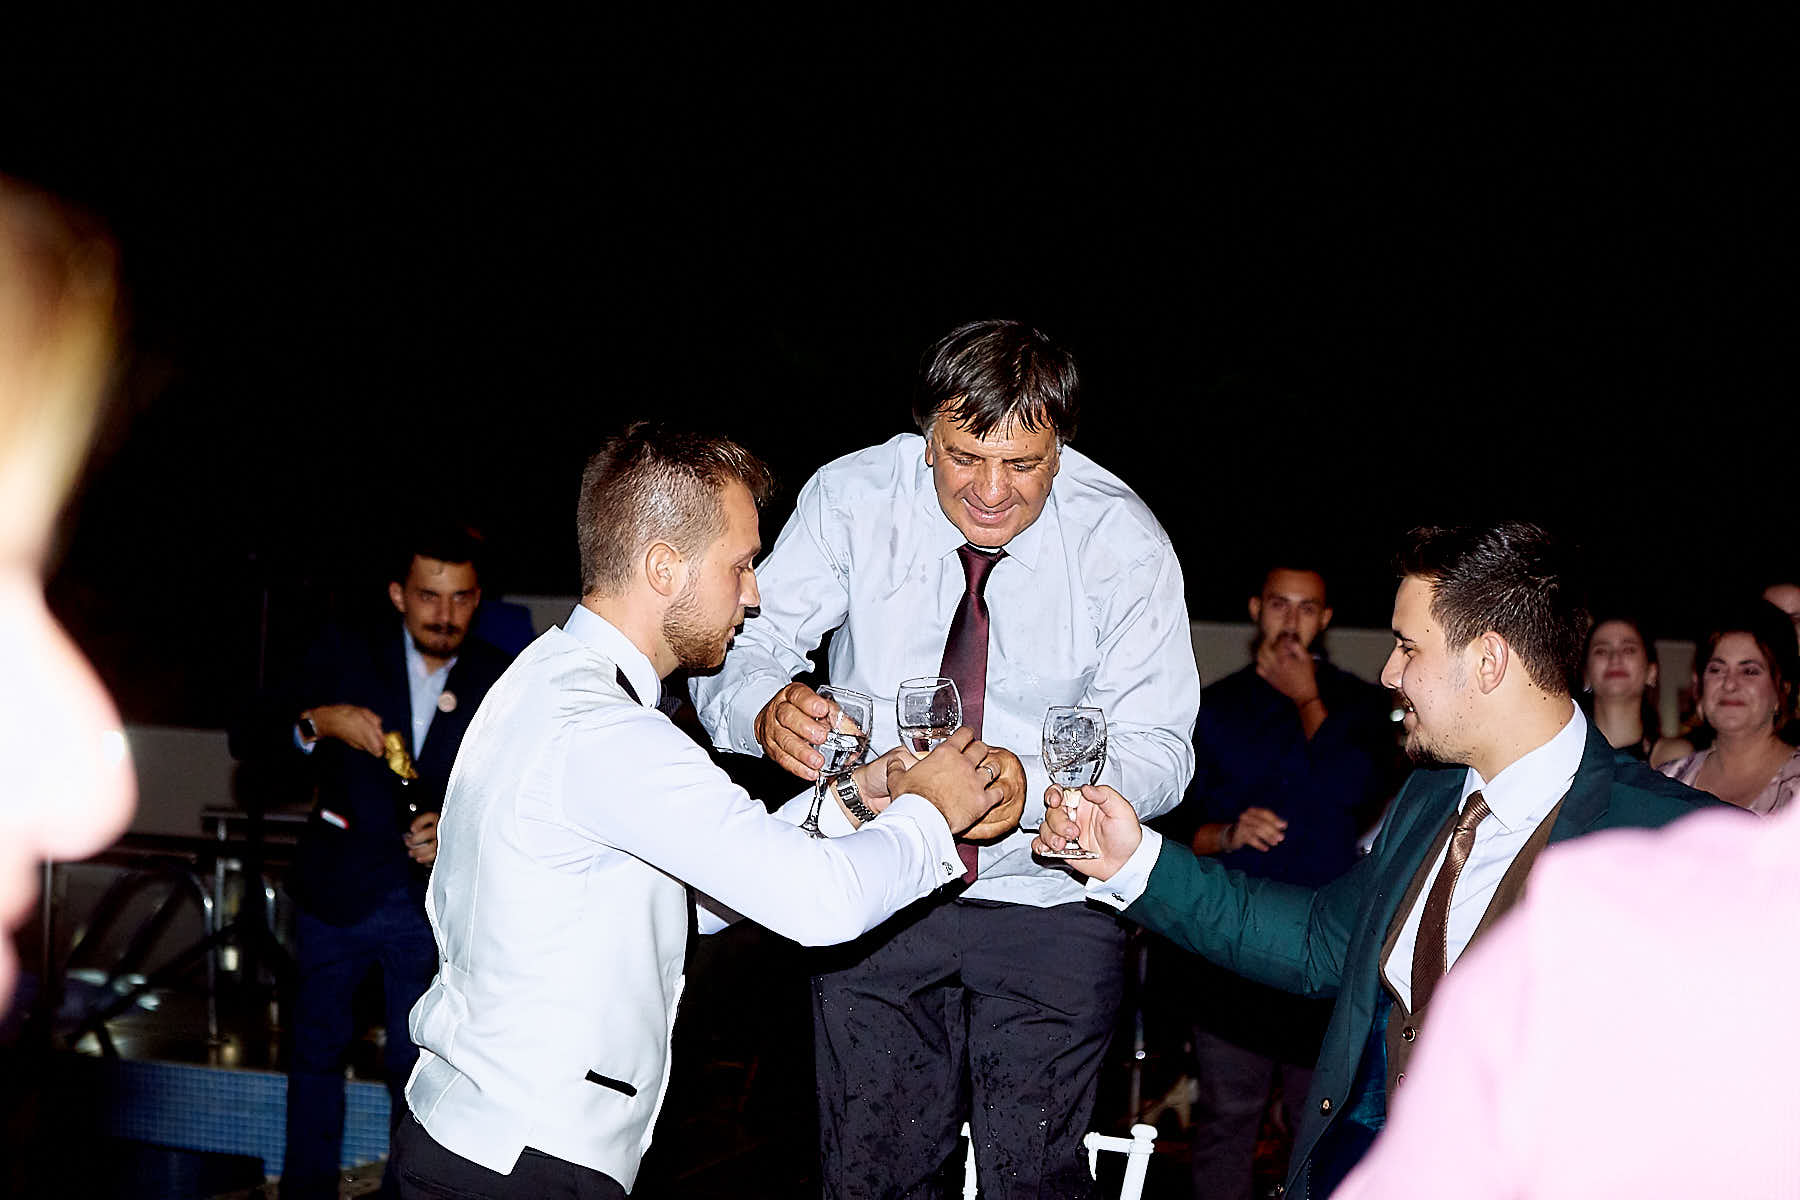 Groom and relatives with drinks